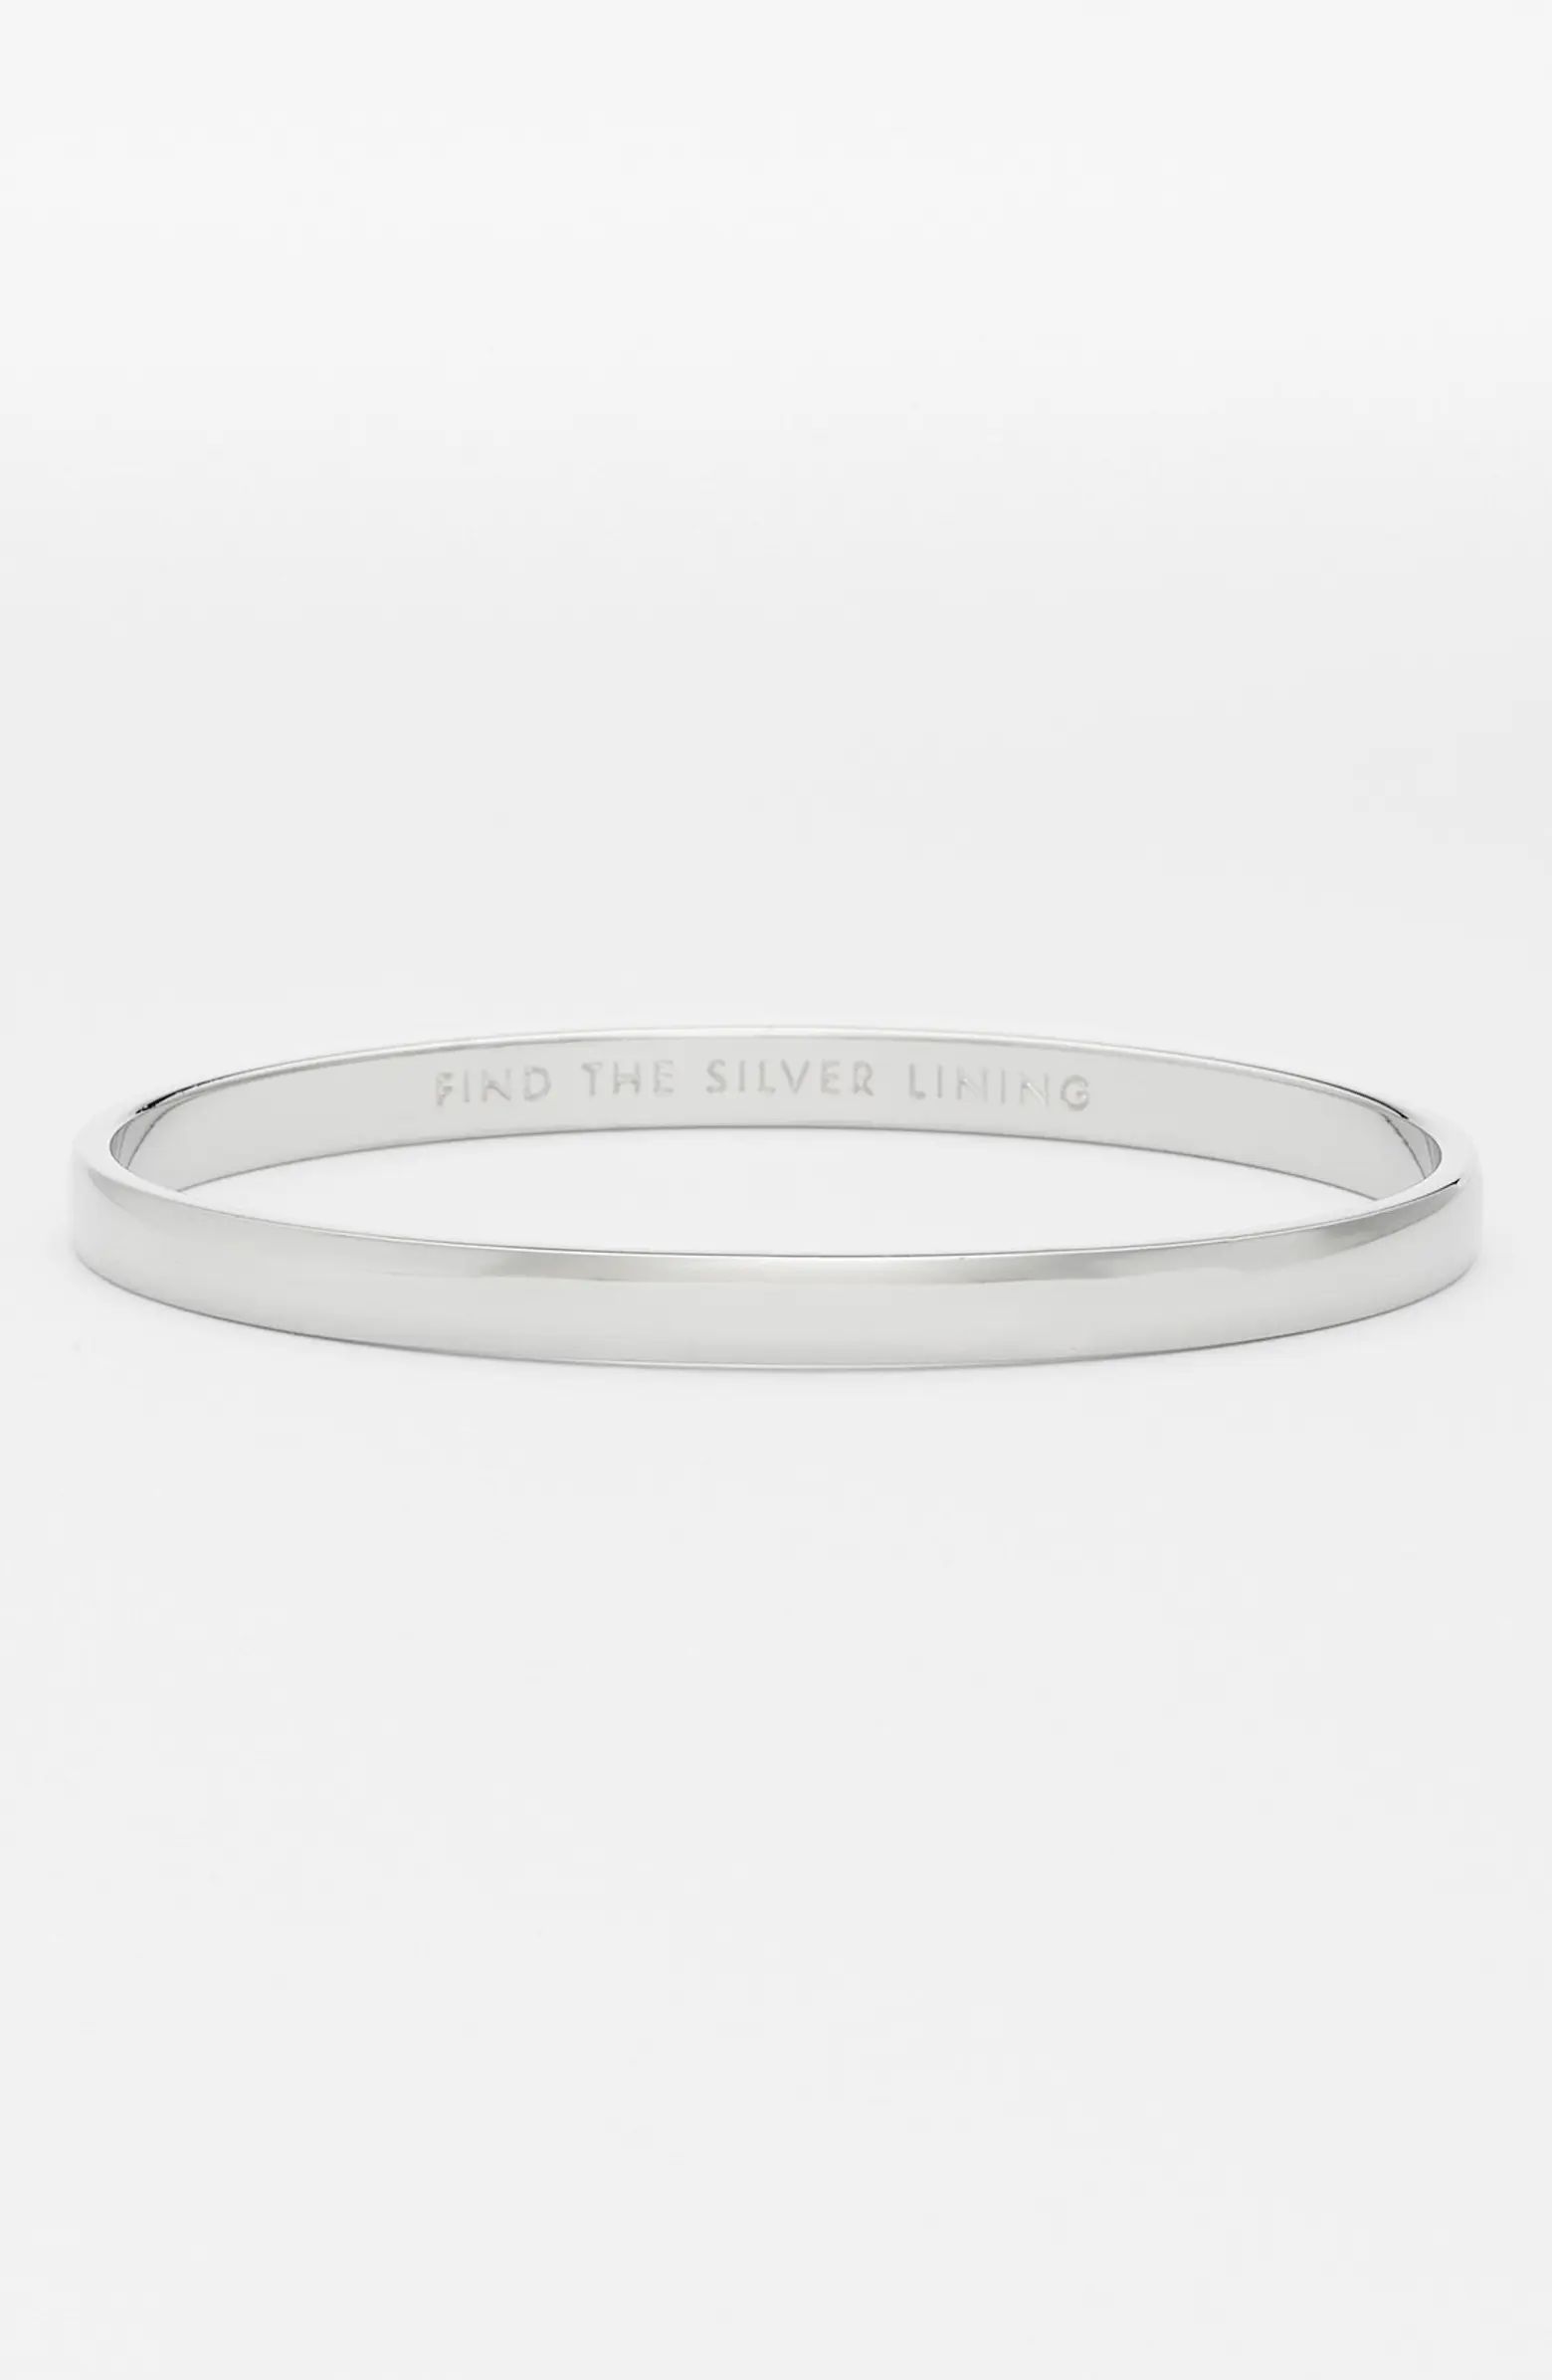 kate spade new york 'idiom - find the silver lining' bangle | Nordstrom | Nordstrom